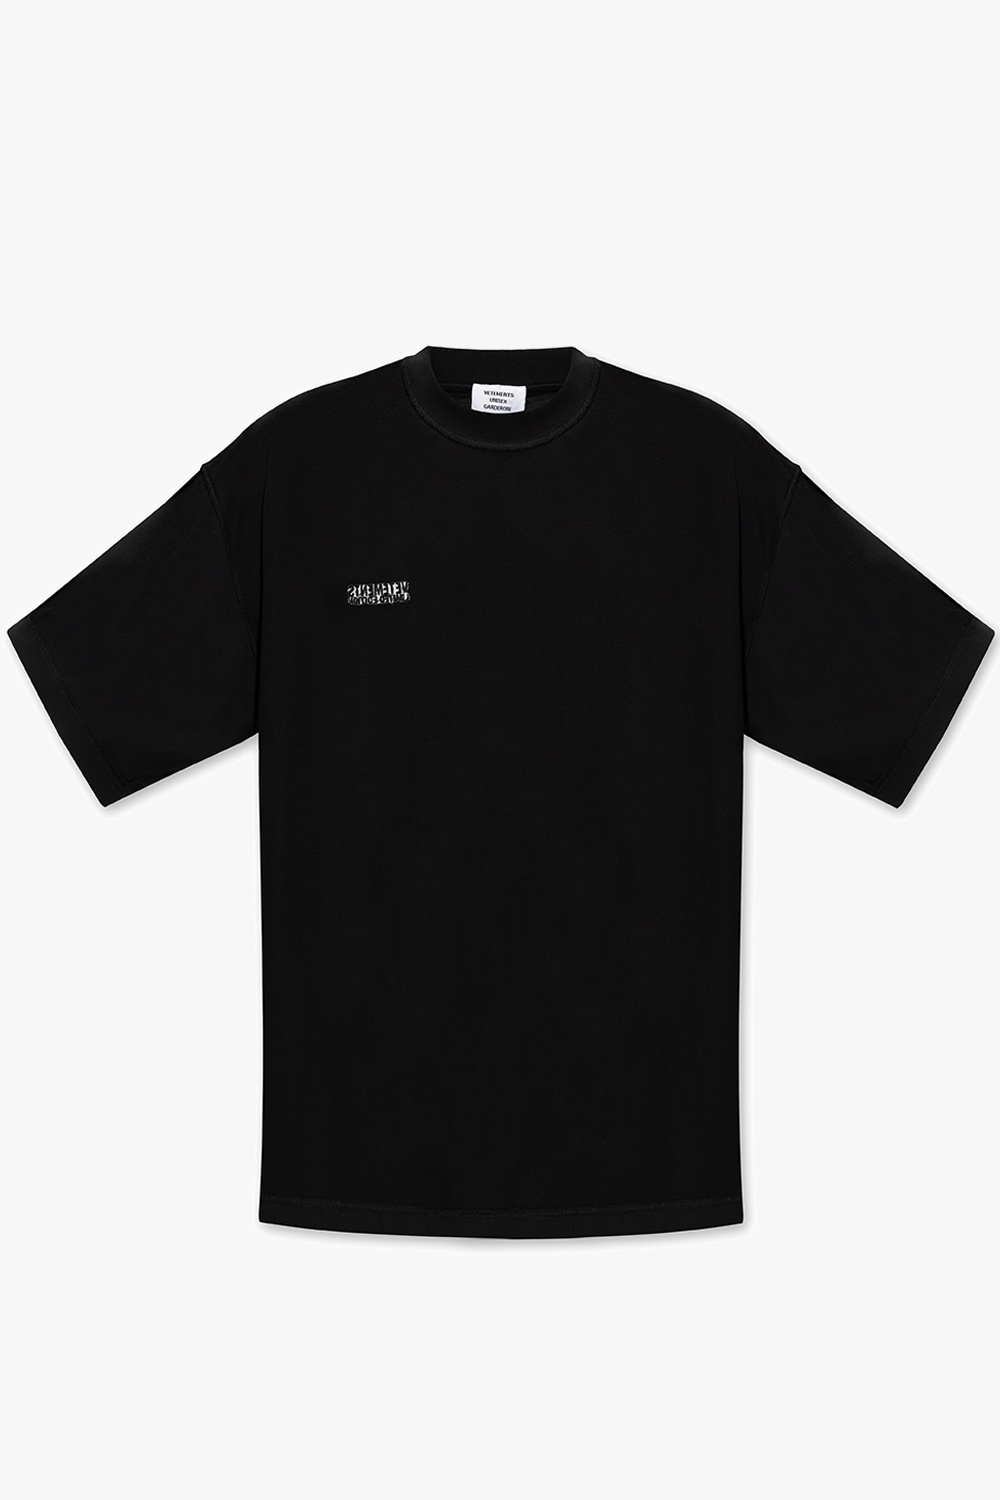 VETEMENTS T-shirt with inside-out effect | Men's Clothing | Vitkac